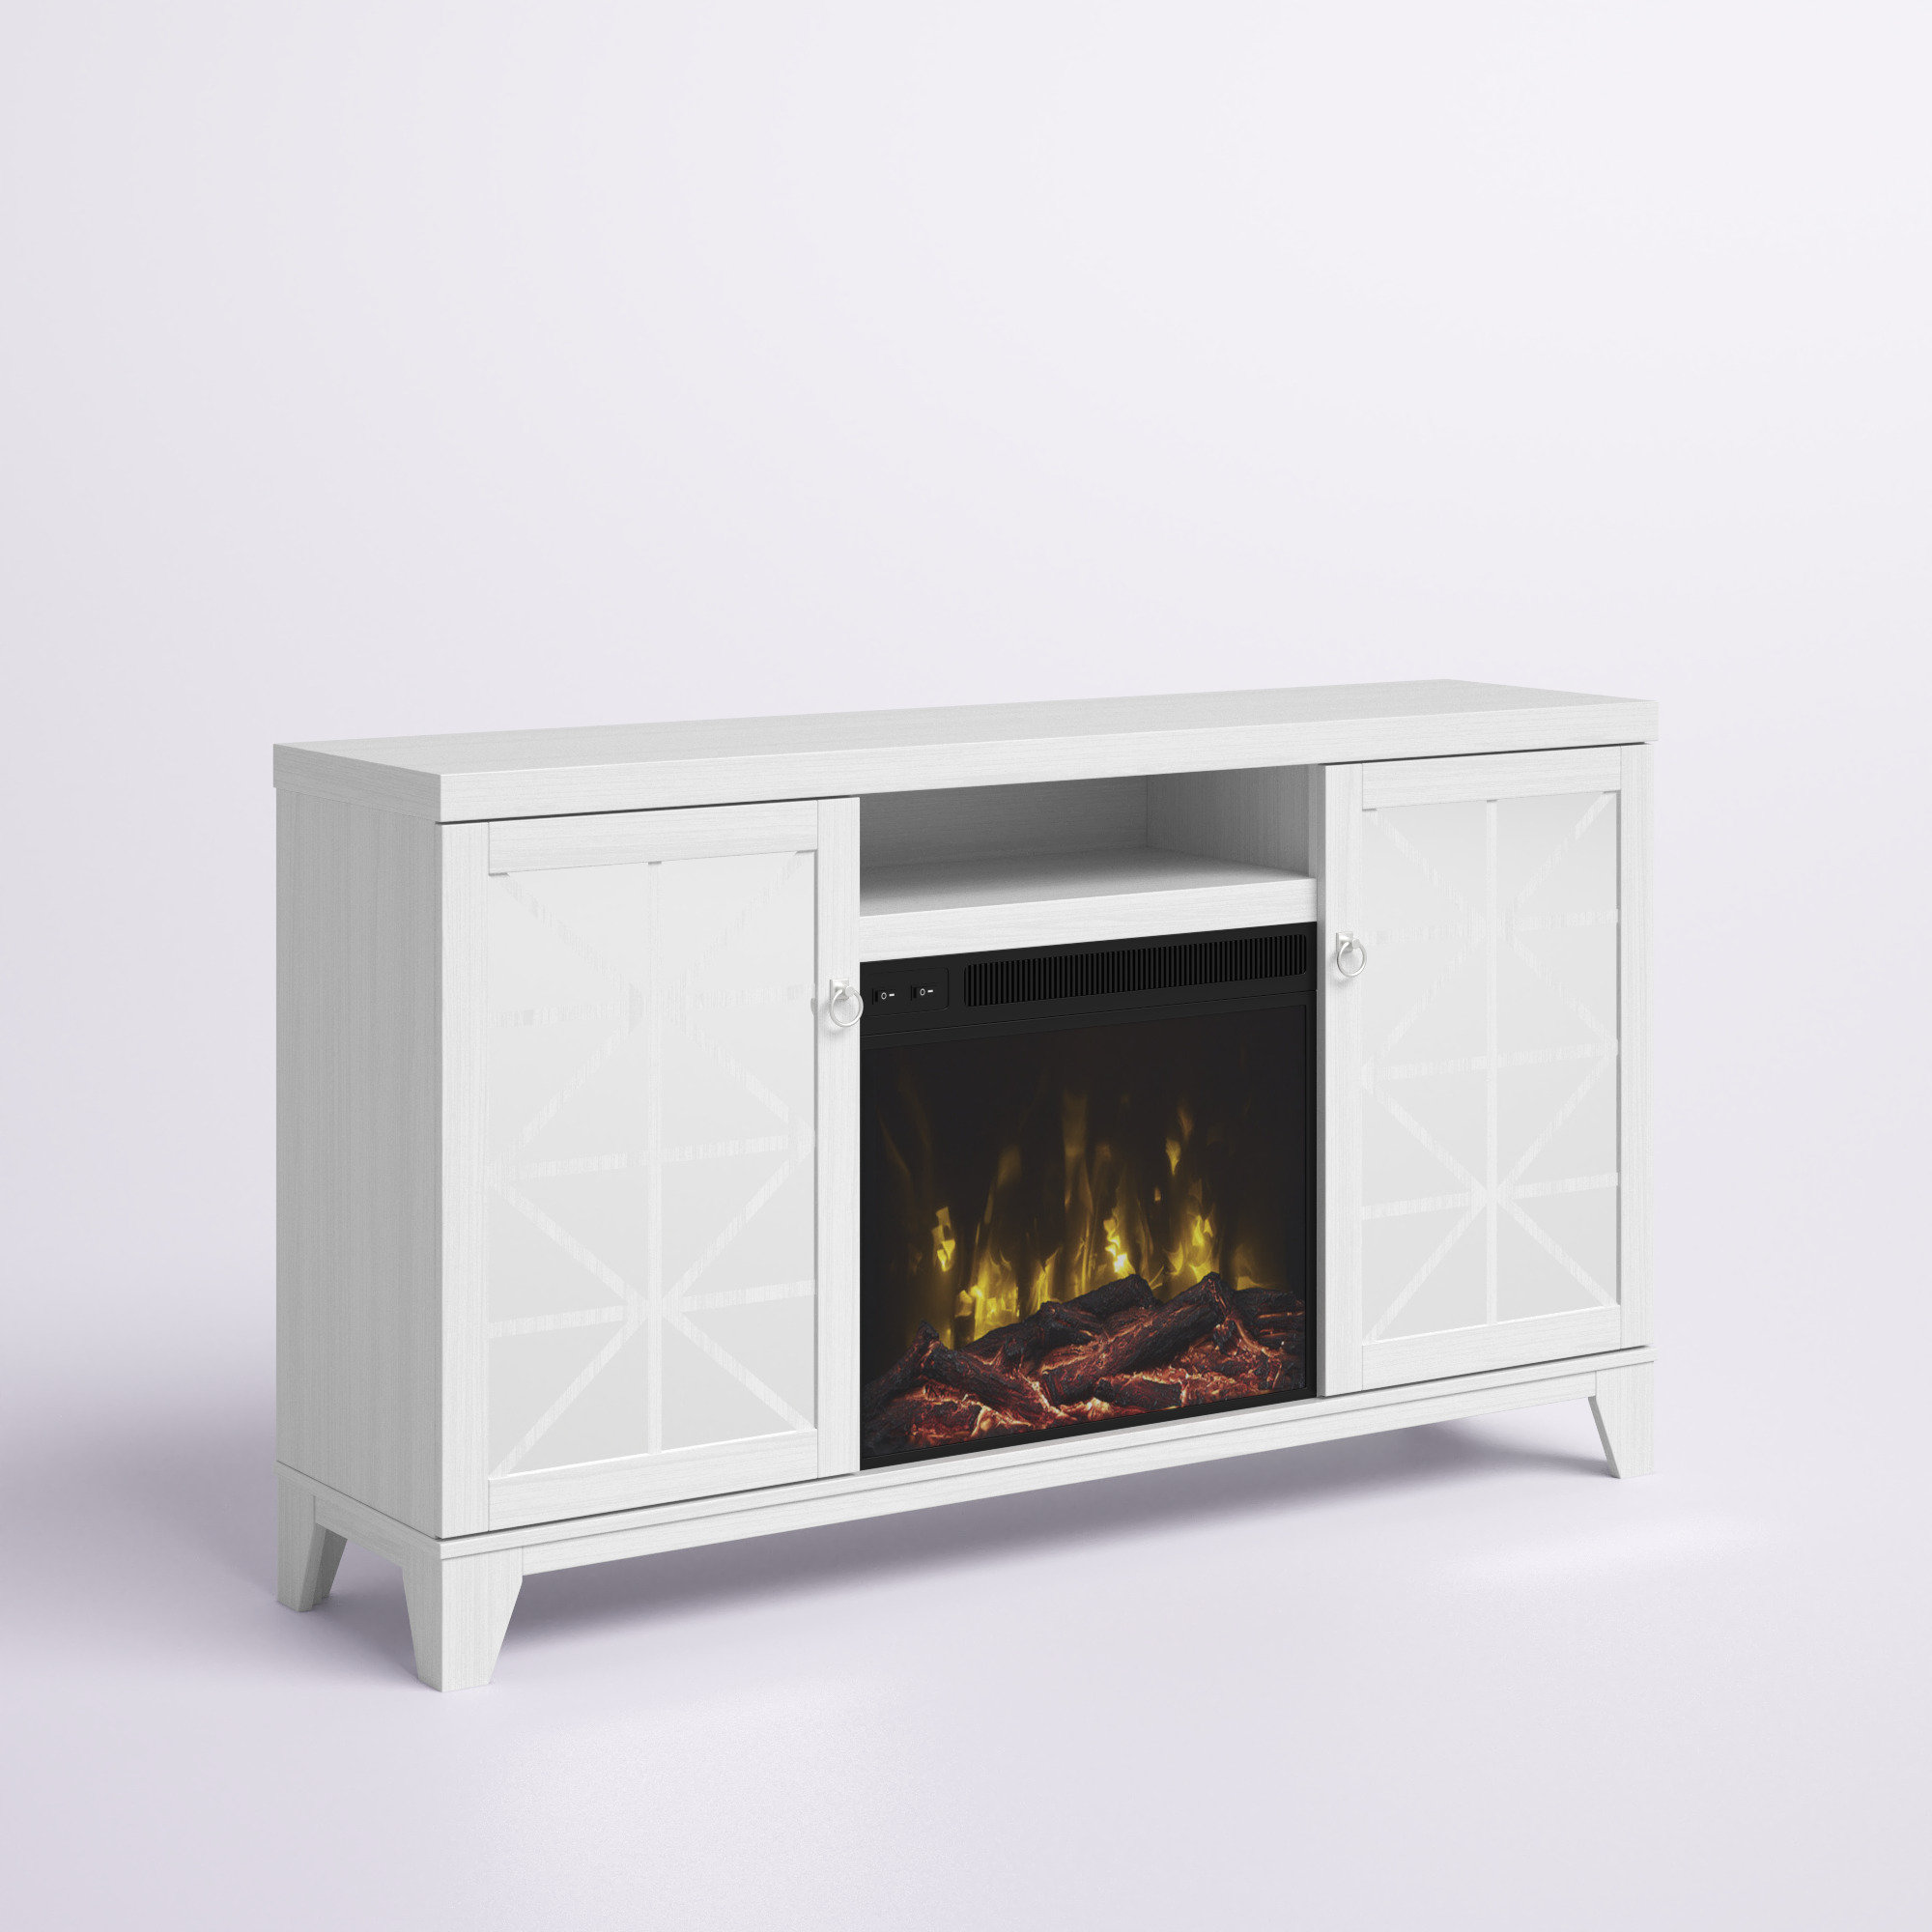 Etta Avenue™ Carrington Tv Stand For Tvs Up To 65 With Fireplace